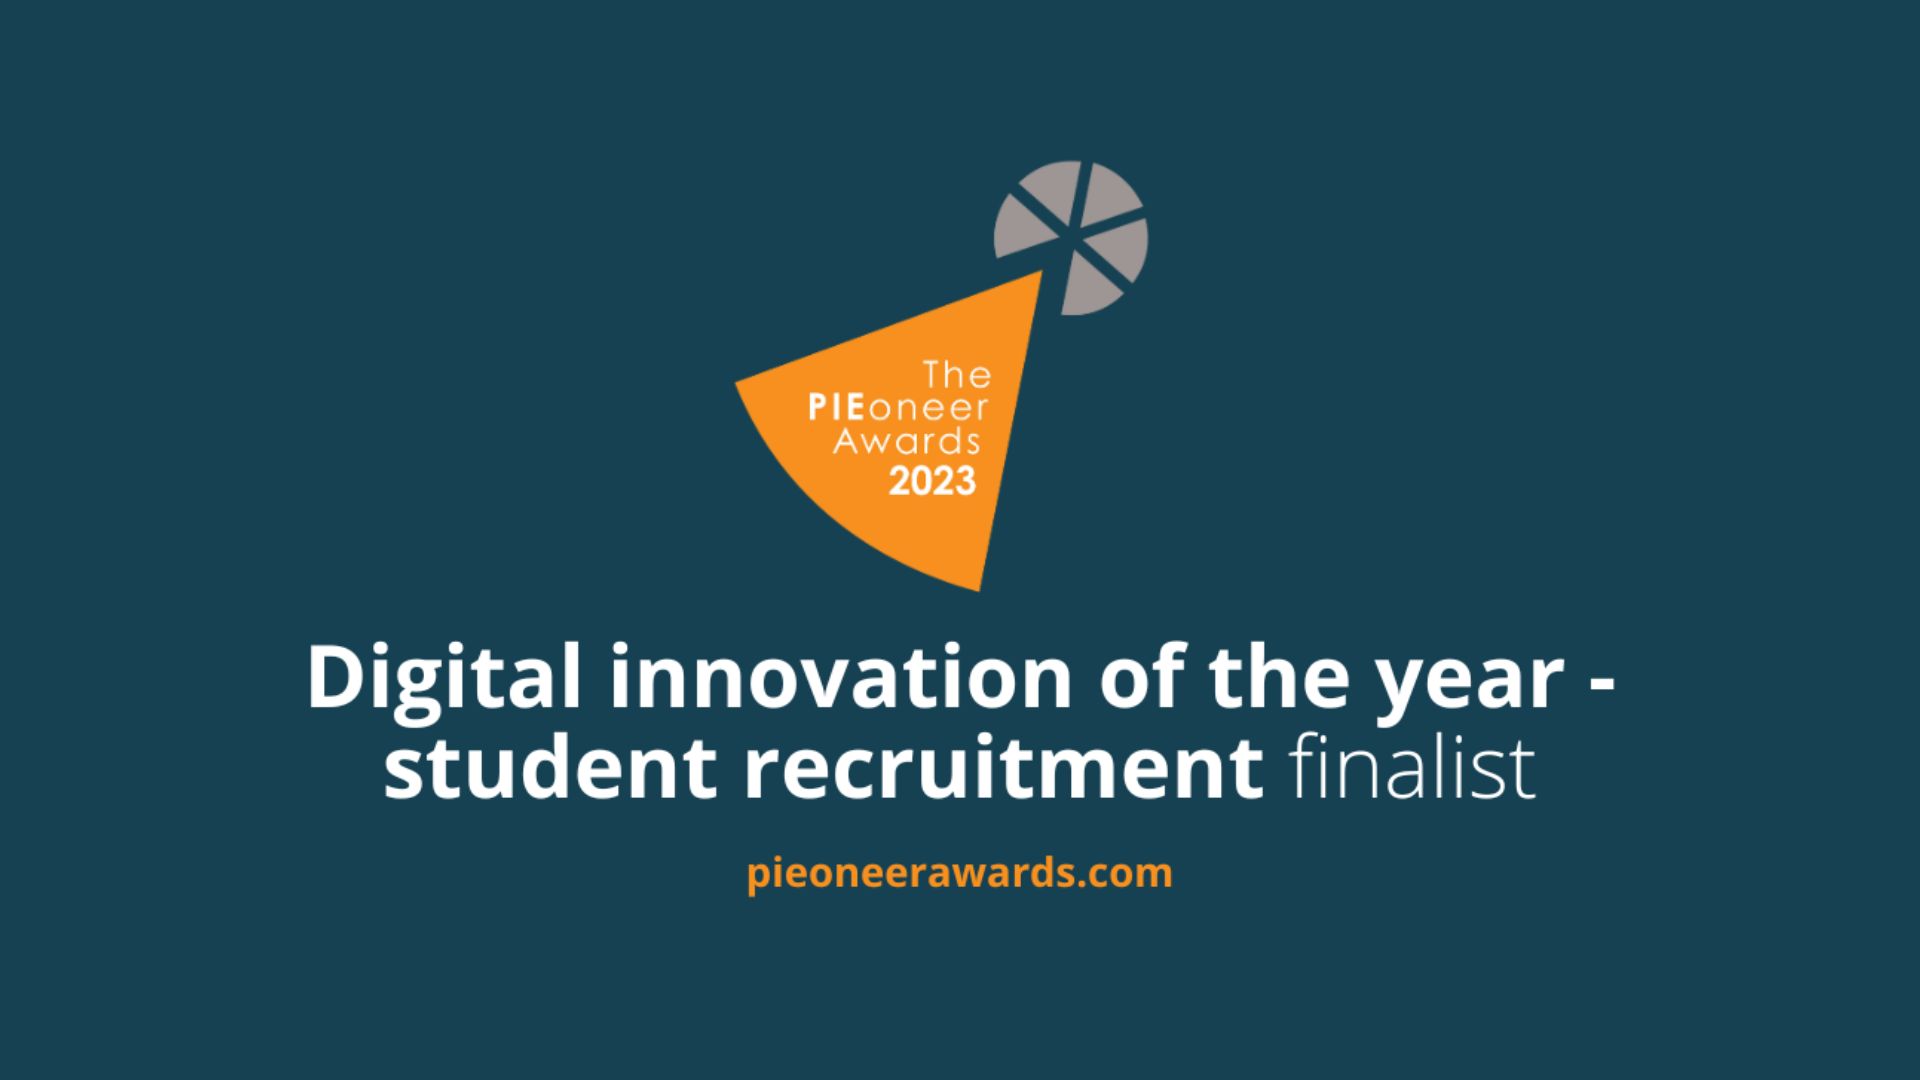 Rosedale named Finalist in “Digital Innovation of the Year – Student Recruitment” for the 2023 PIEoneer Awards